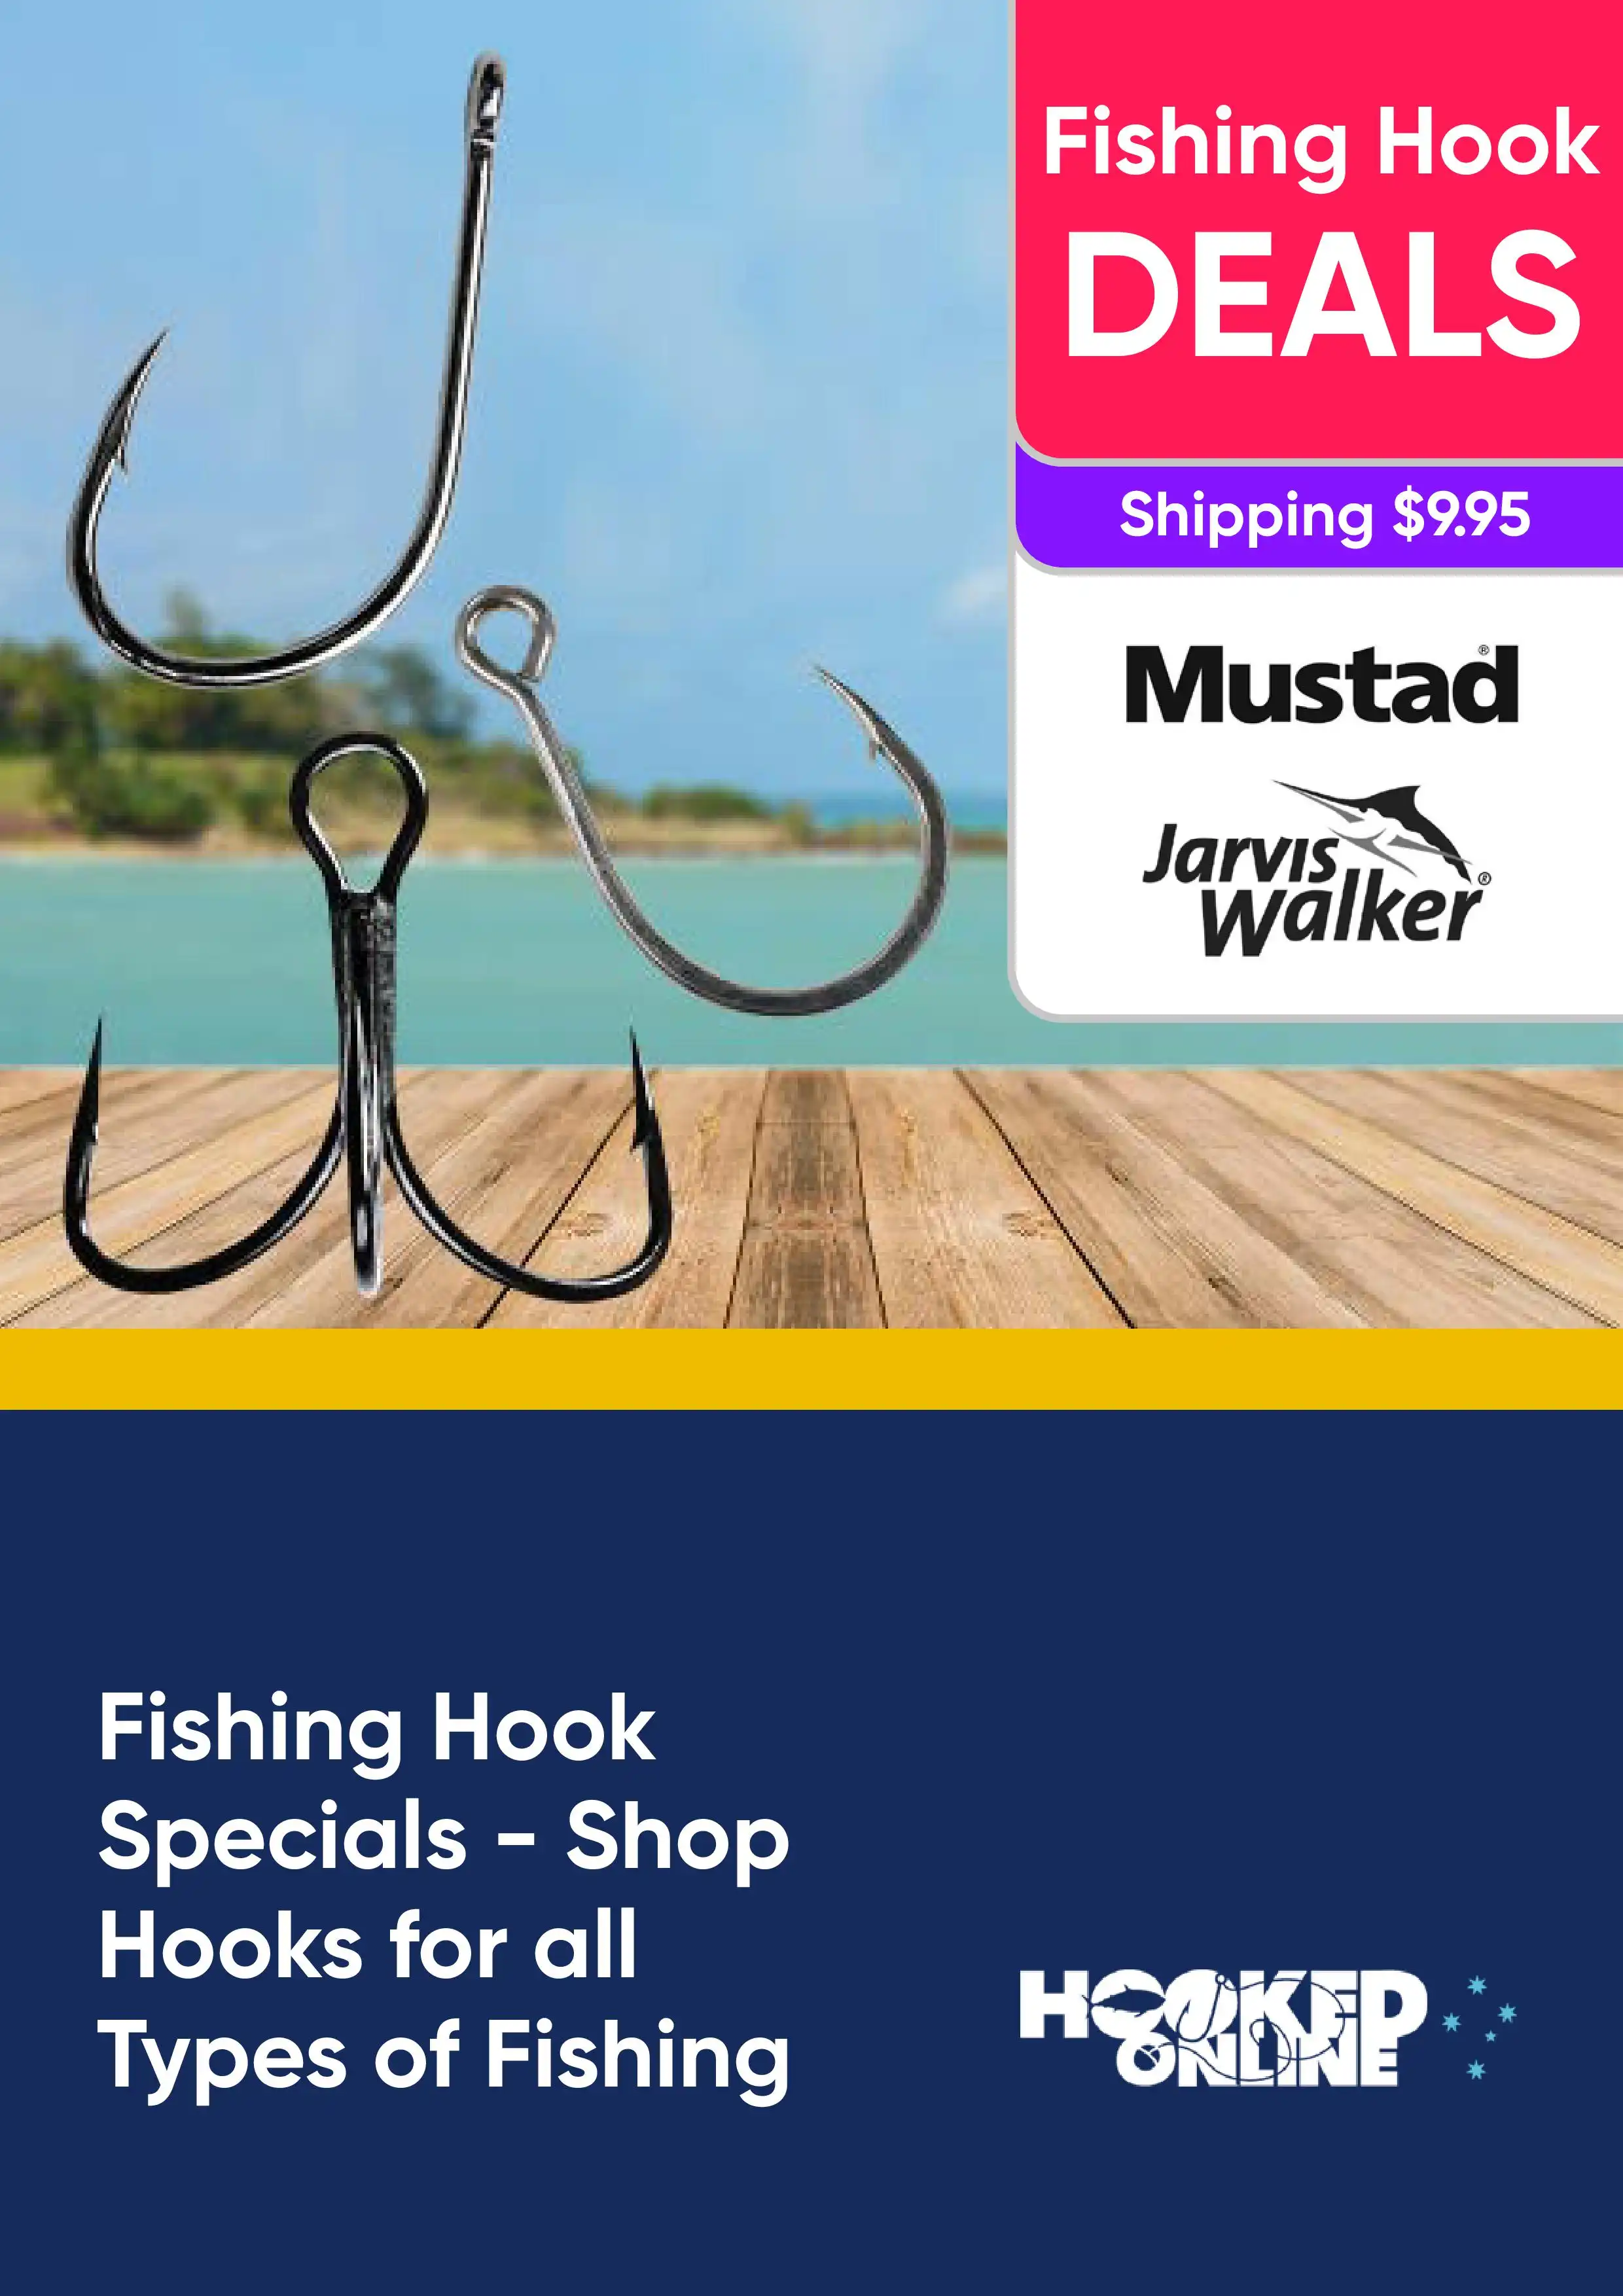 Fishing Hook Specials - Shop Hooks for all Types of Fishing